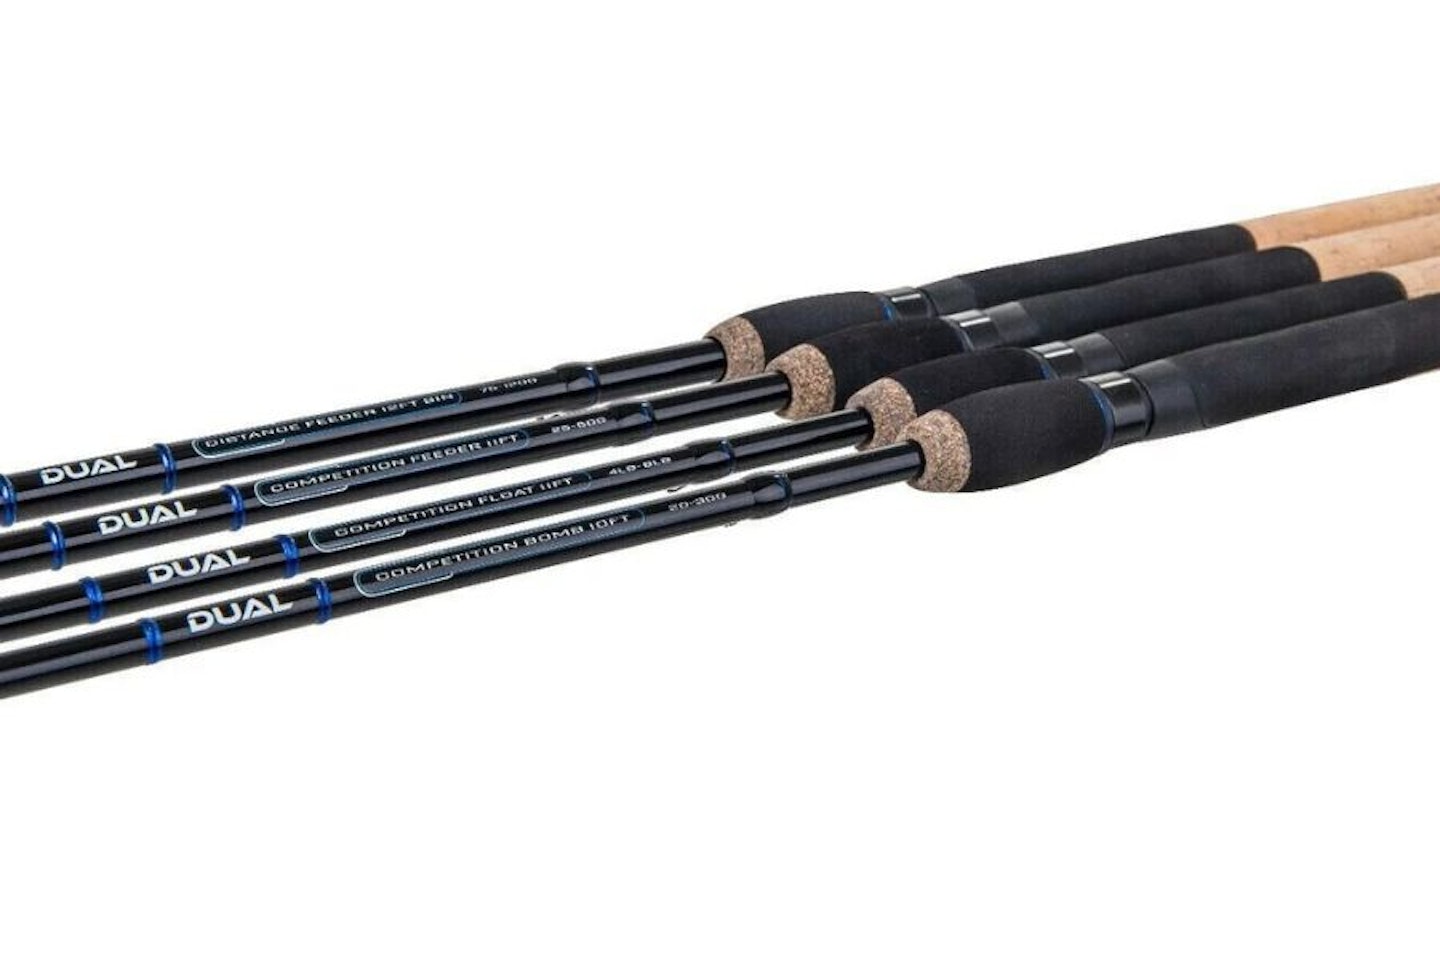 MAP Dual Competition 9ft Bomb Rod review